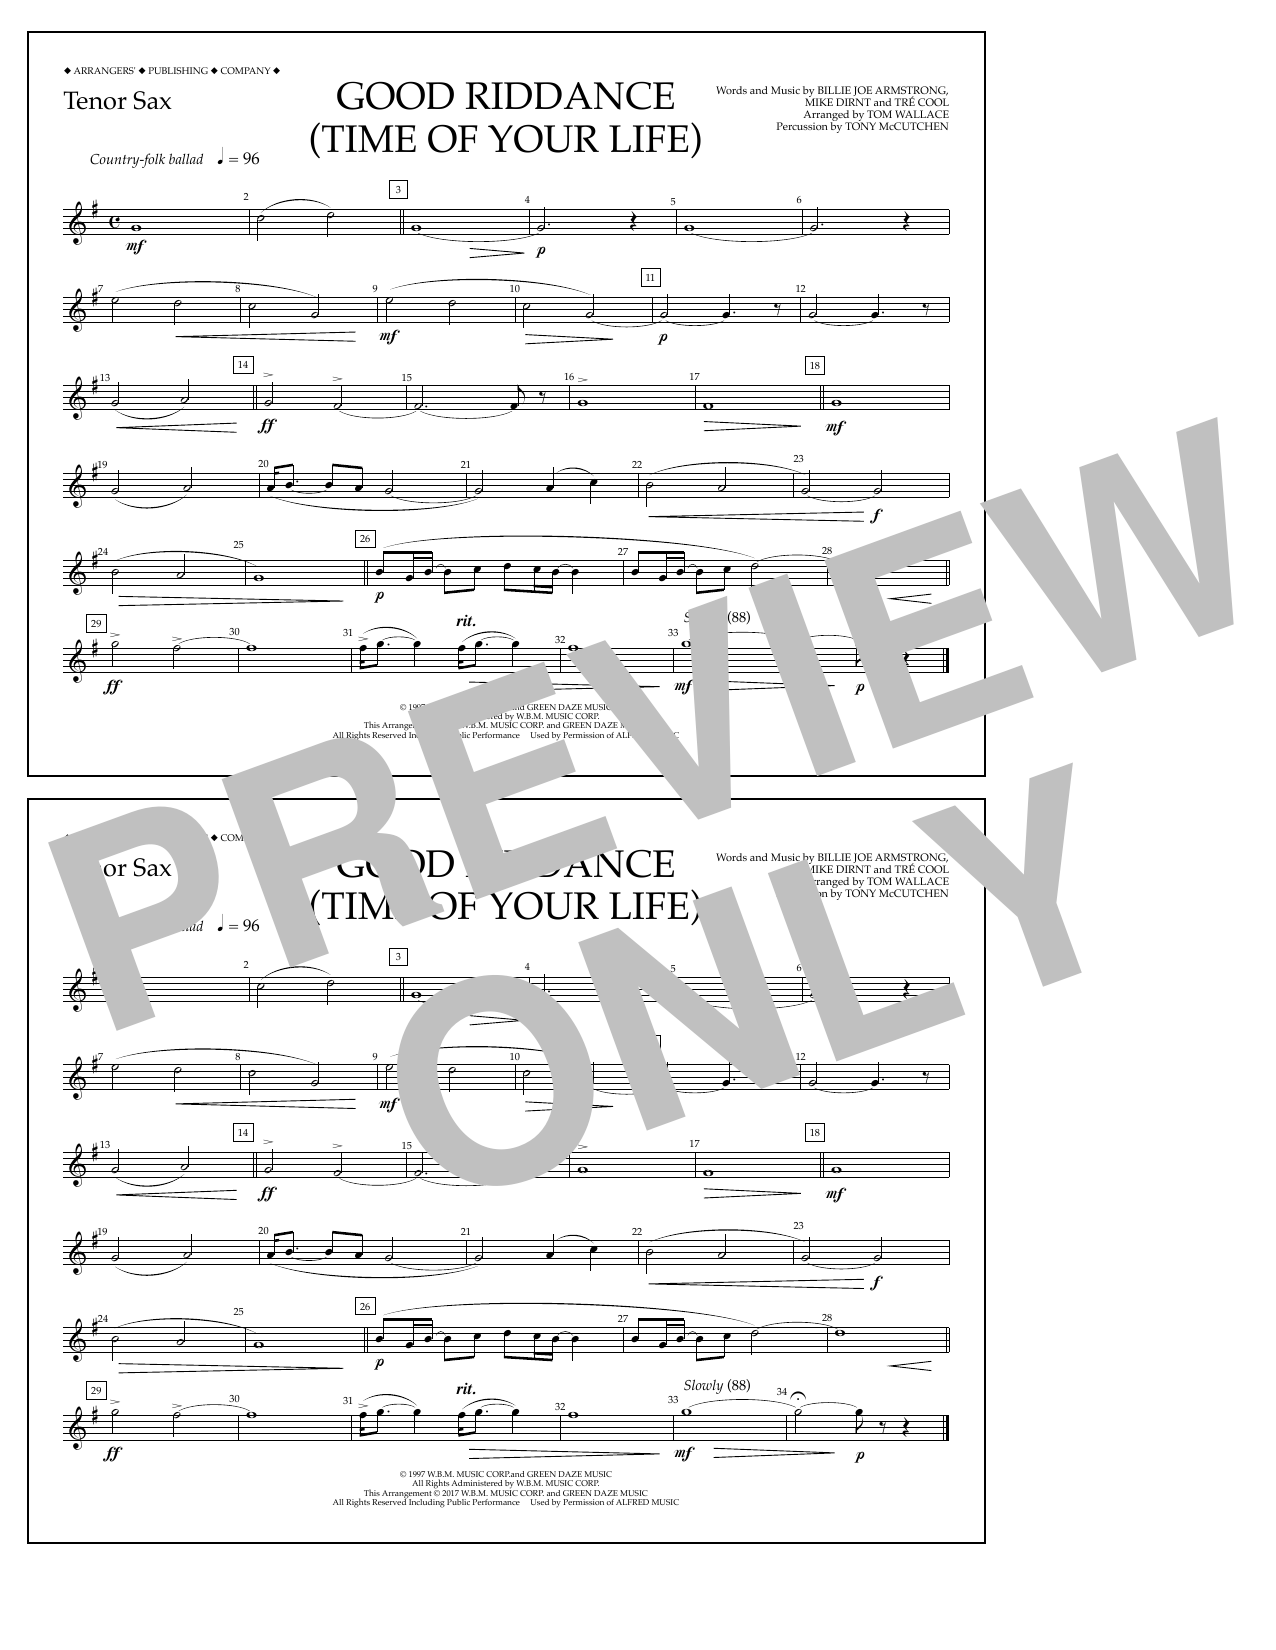 Download Tom Wallace Good Riddance (Time of Your Life) - Ten Sheet Music